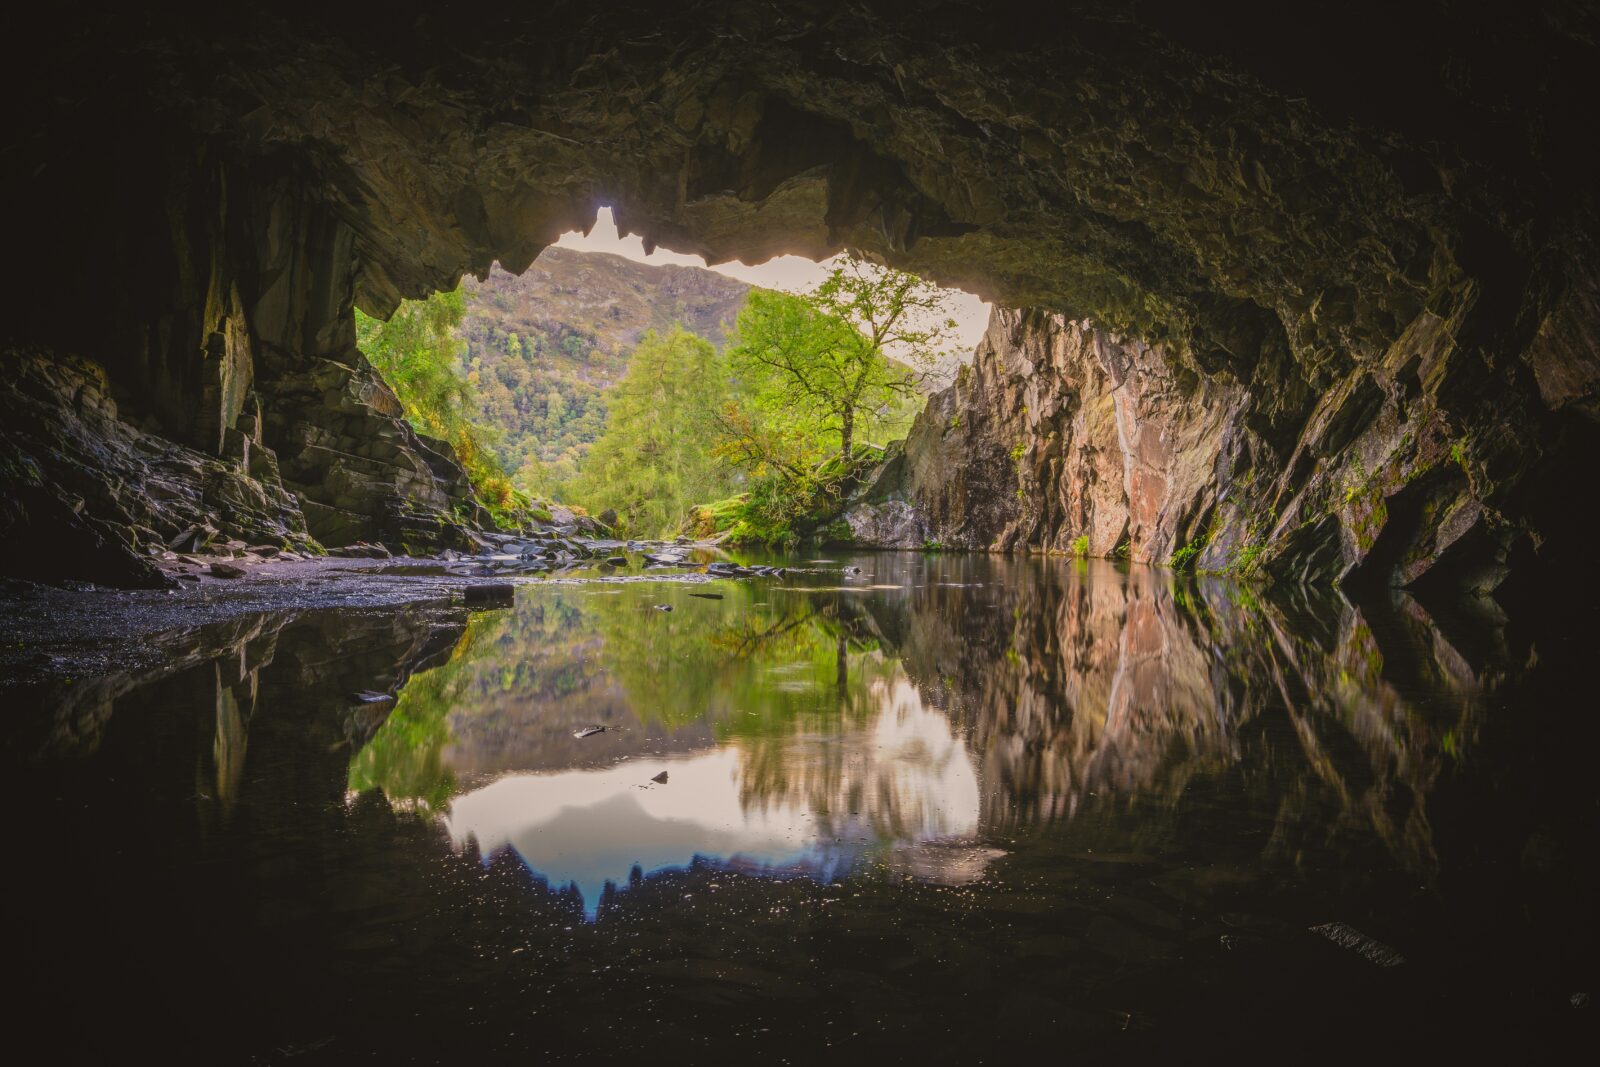 Rydal Caves in the Lake District made Time Out's list of the Most Beautiful Places. Credit: Unsplash, Jonny Gios